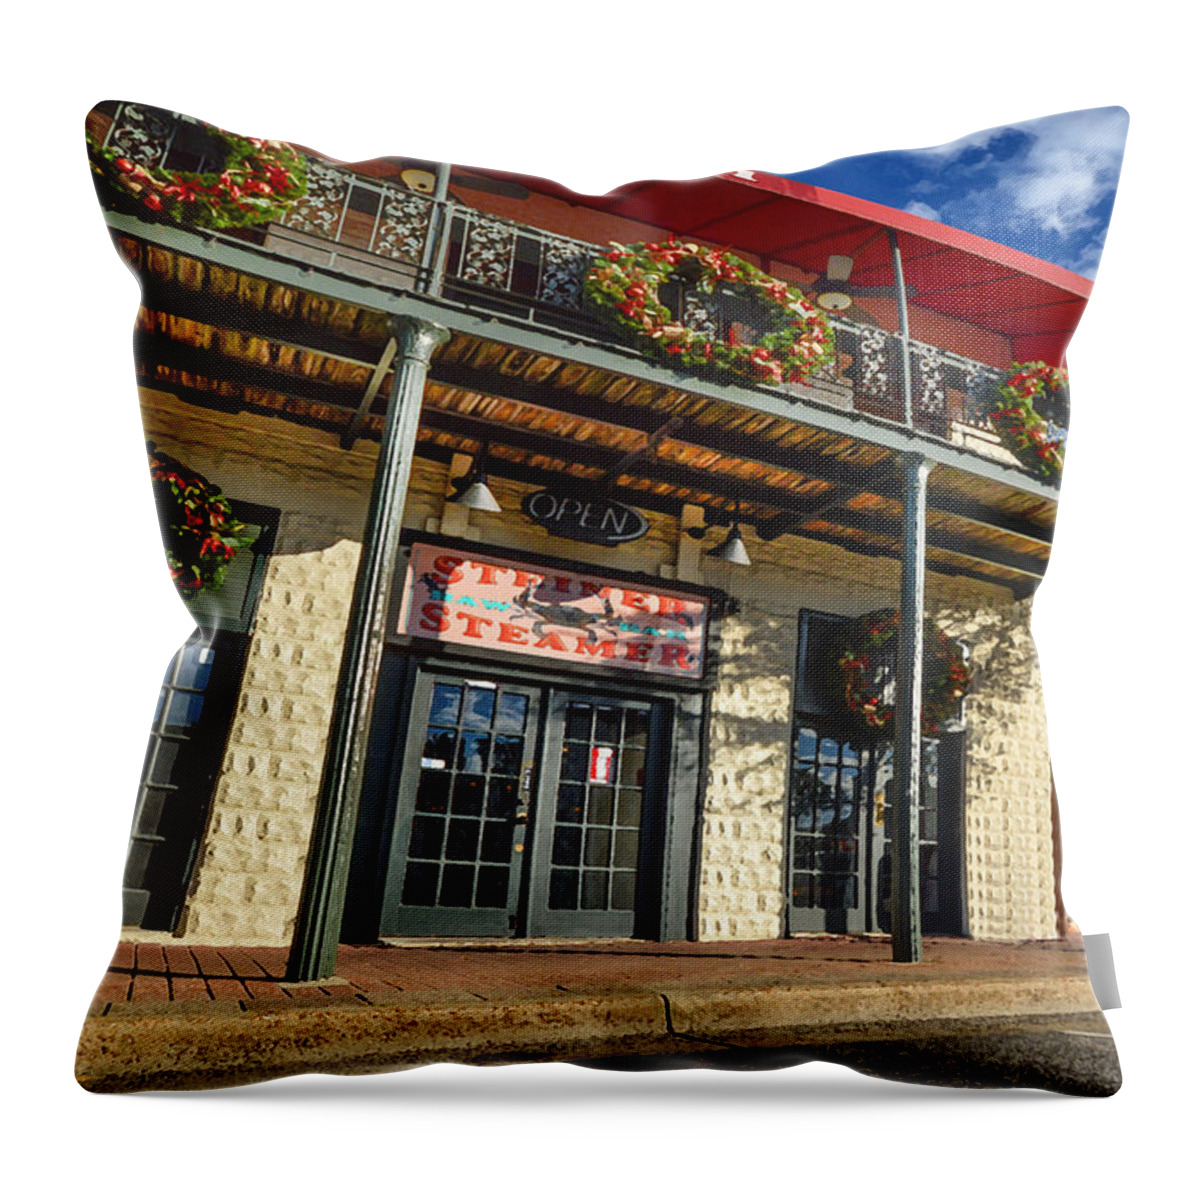 Palm Throw Pillow featuring the digital art Steiners Steamers by Michael Thomas